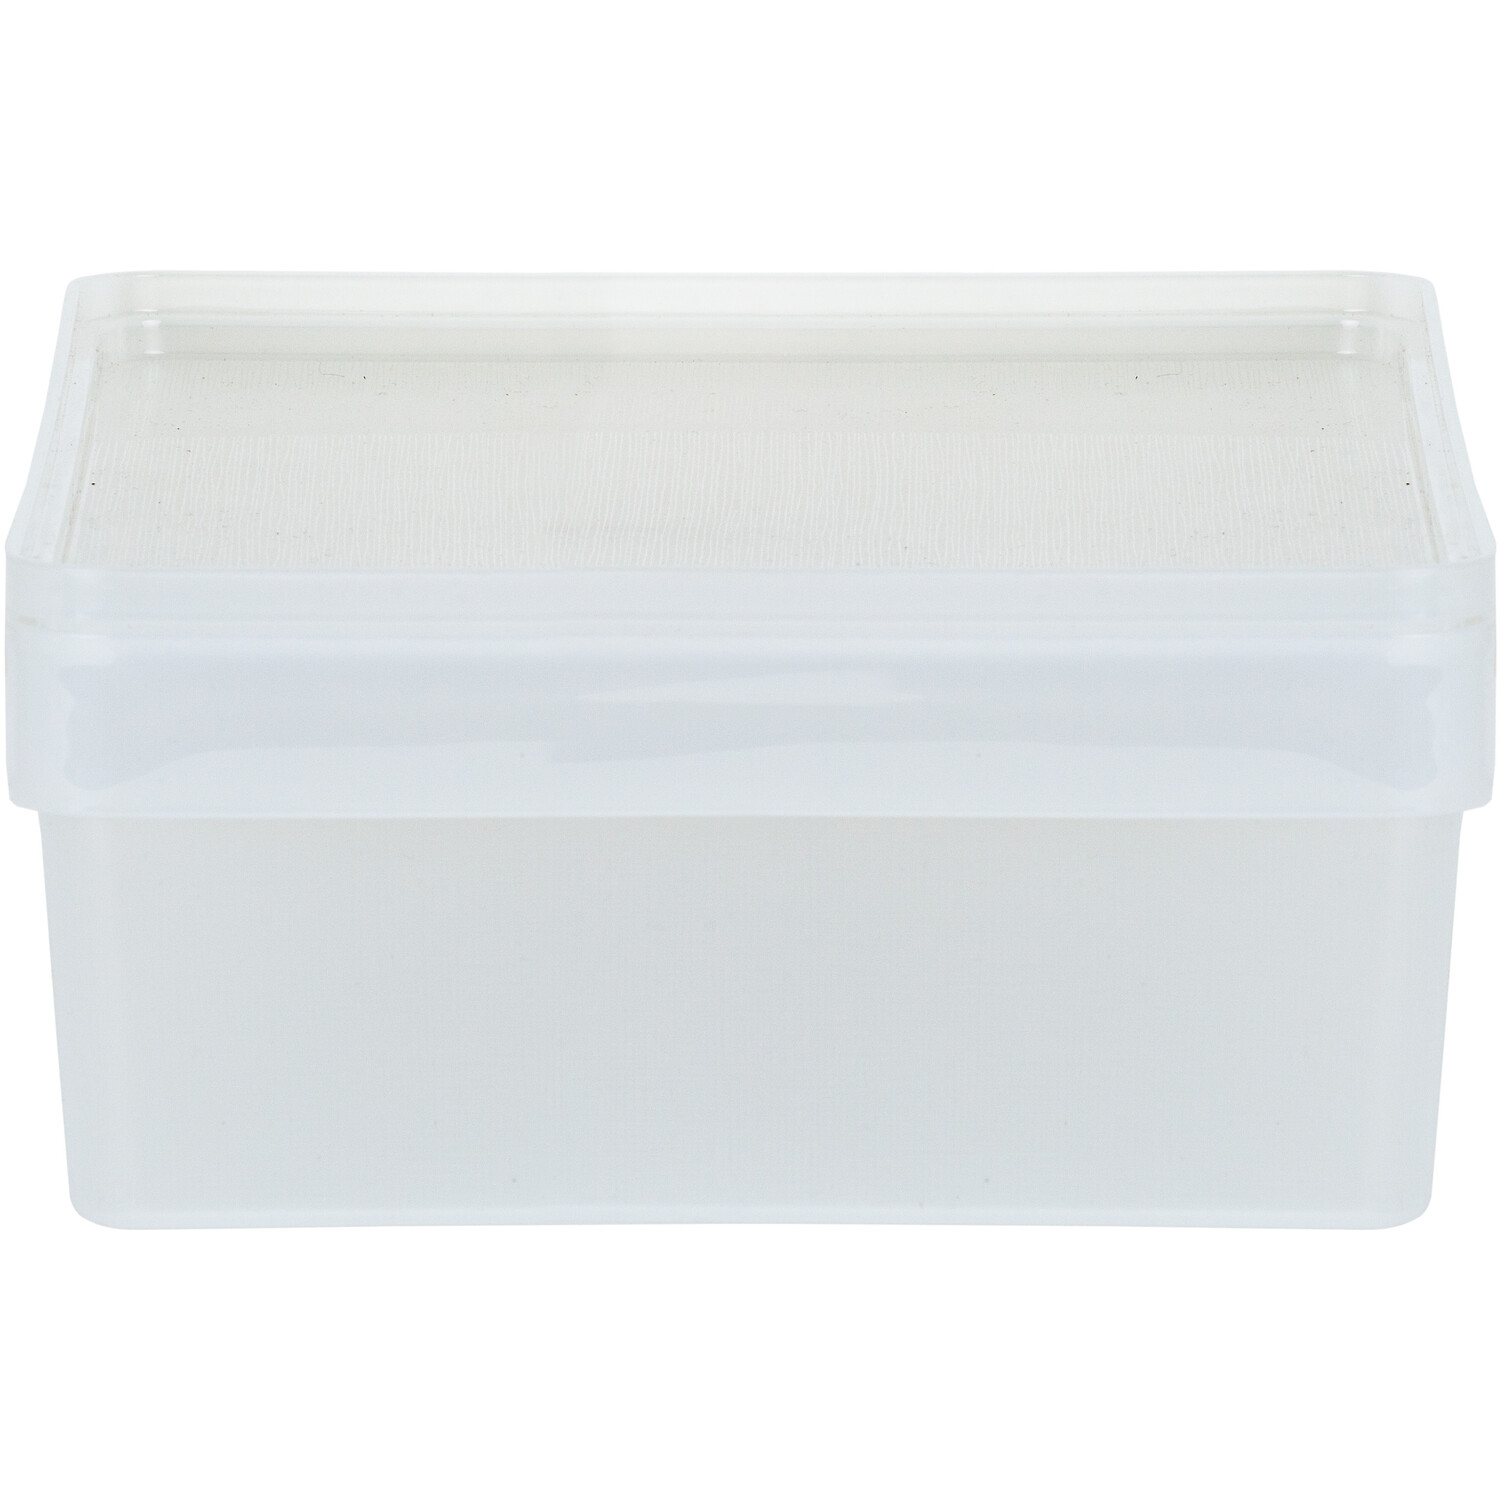 Studio Box and Lid  - Clear / 11cm Image 2